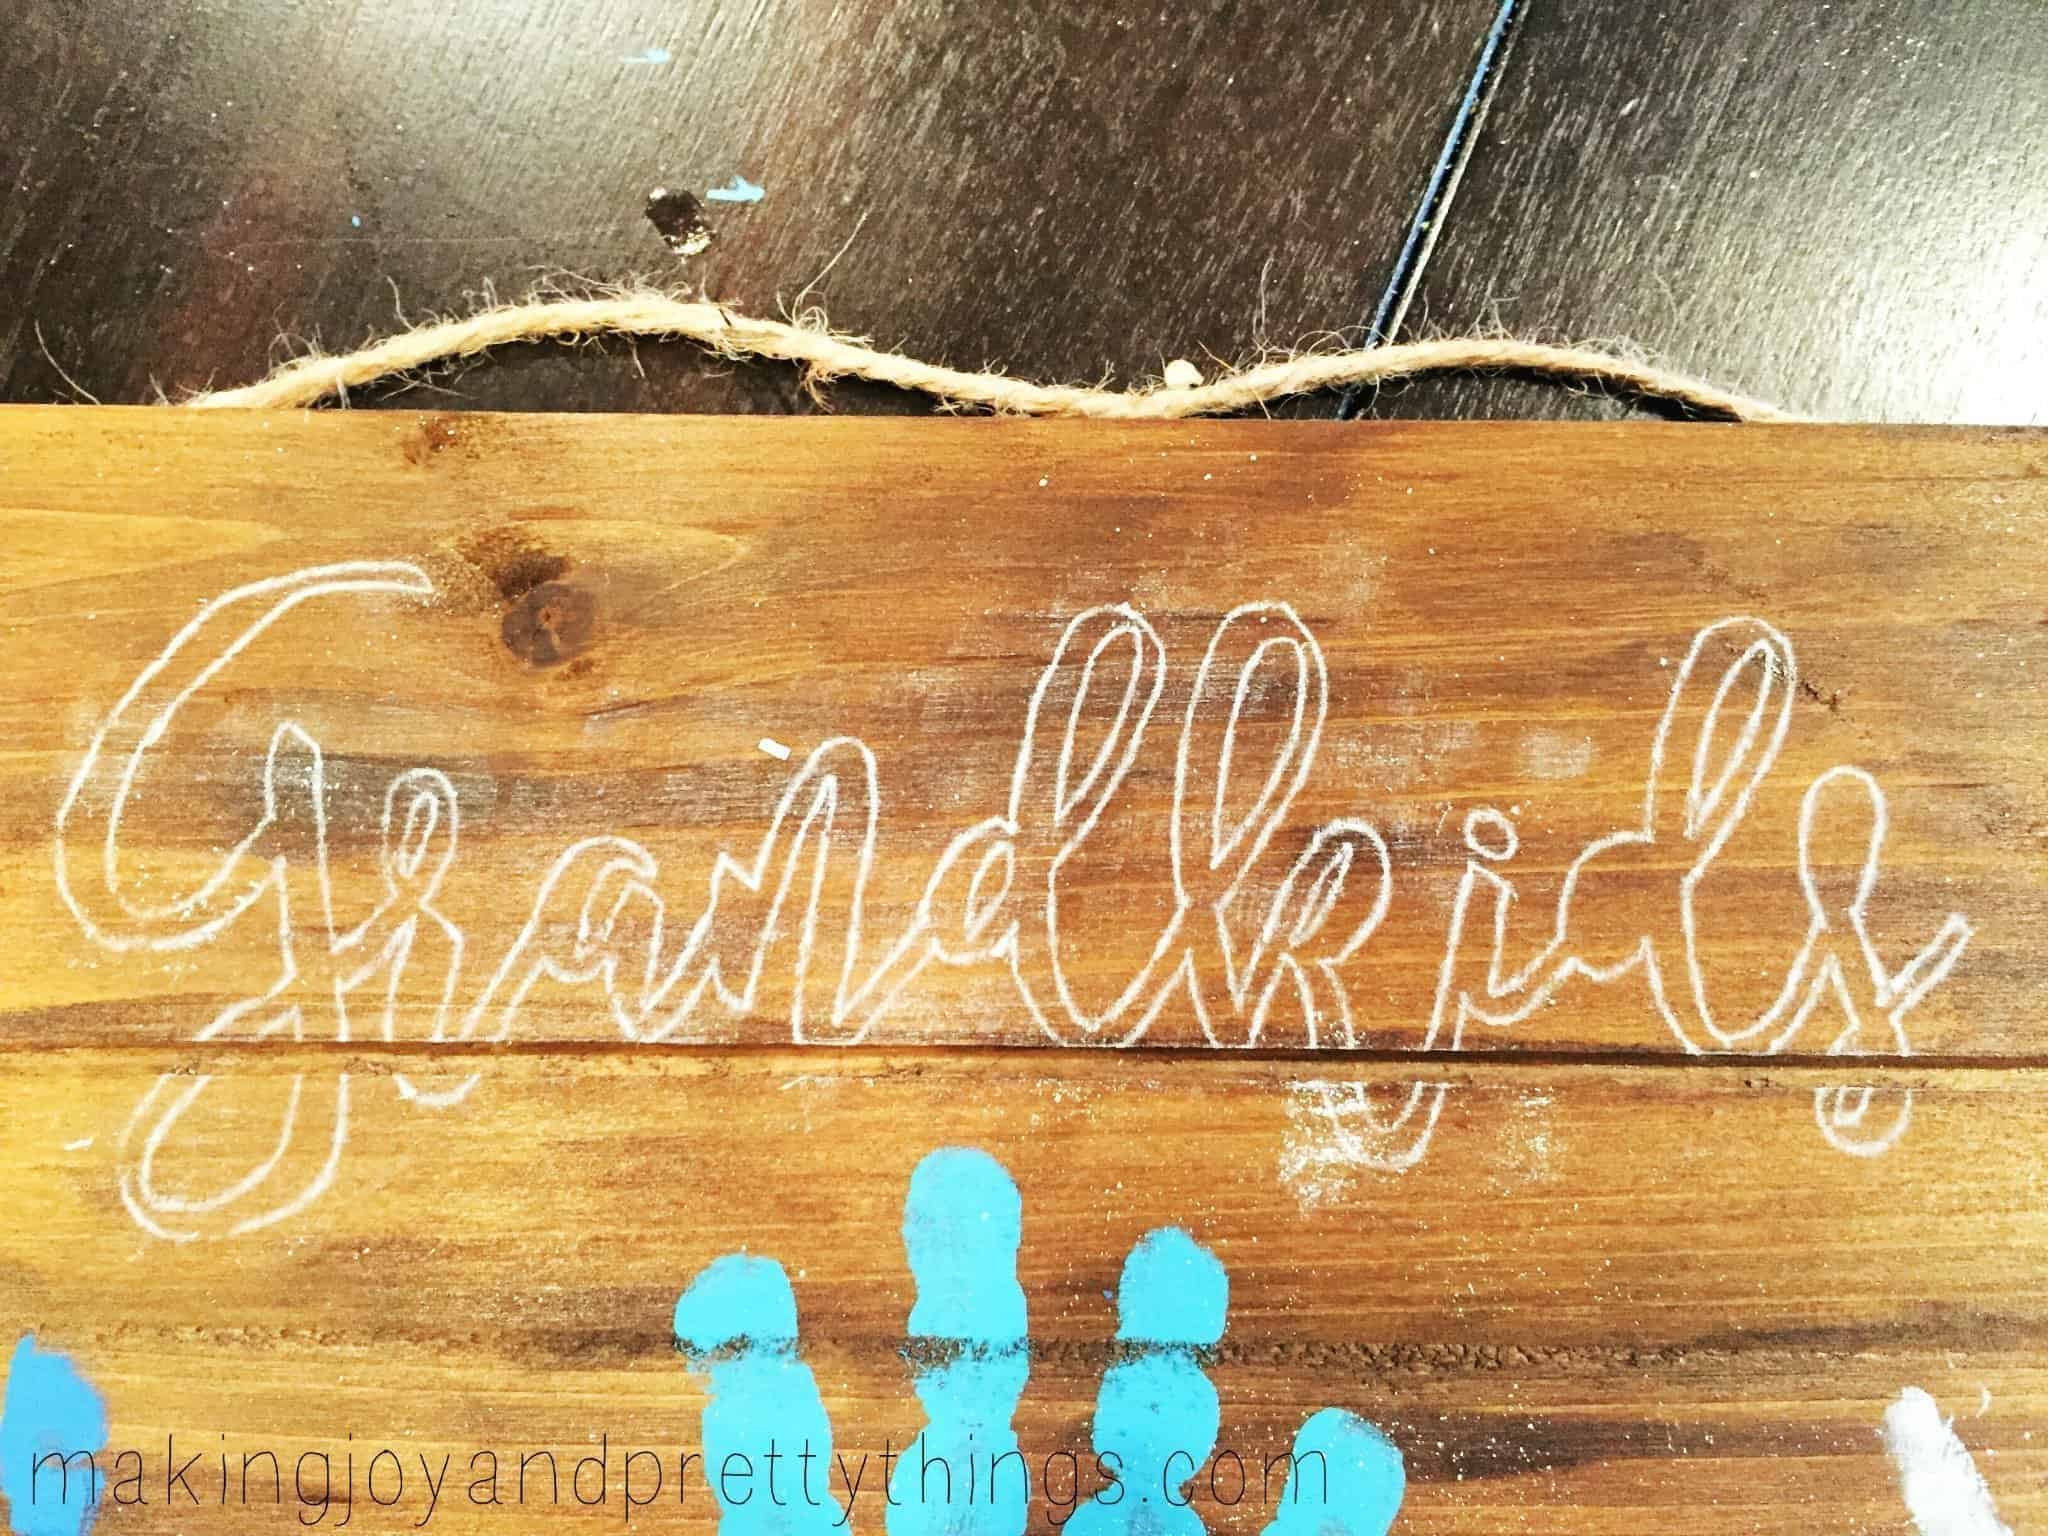 A look at how the transfer looks after you traced the font onto the handprint art for grandma